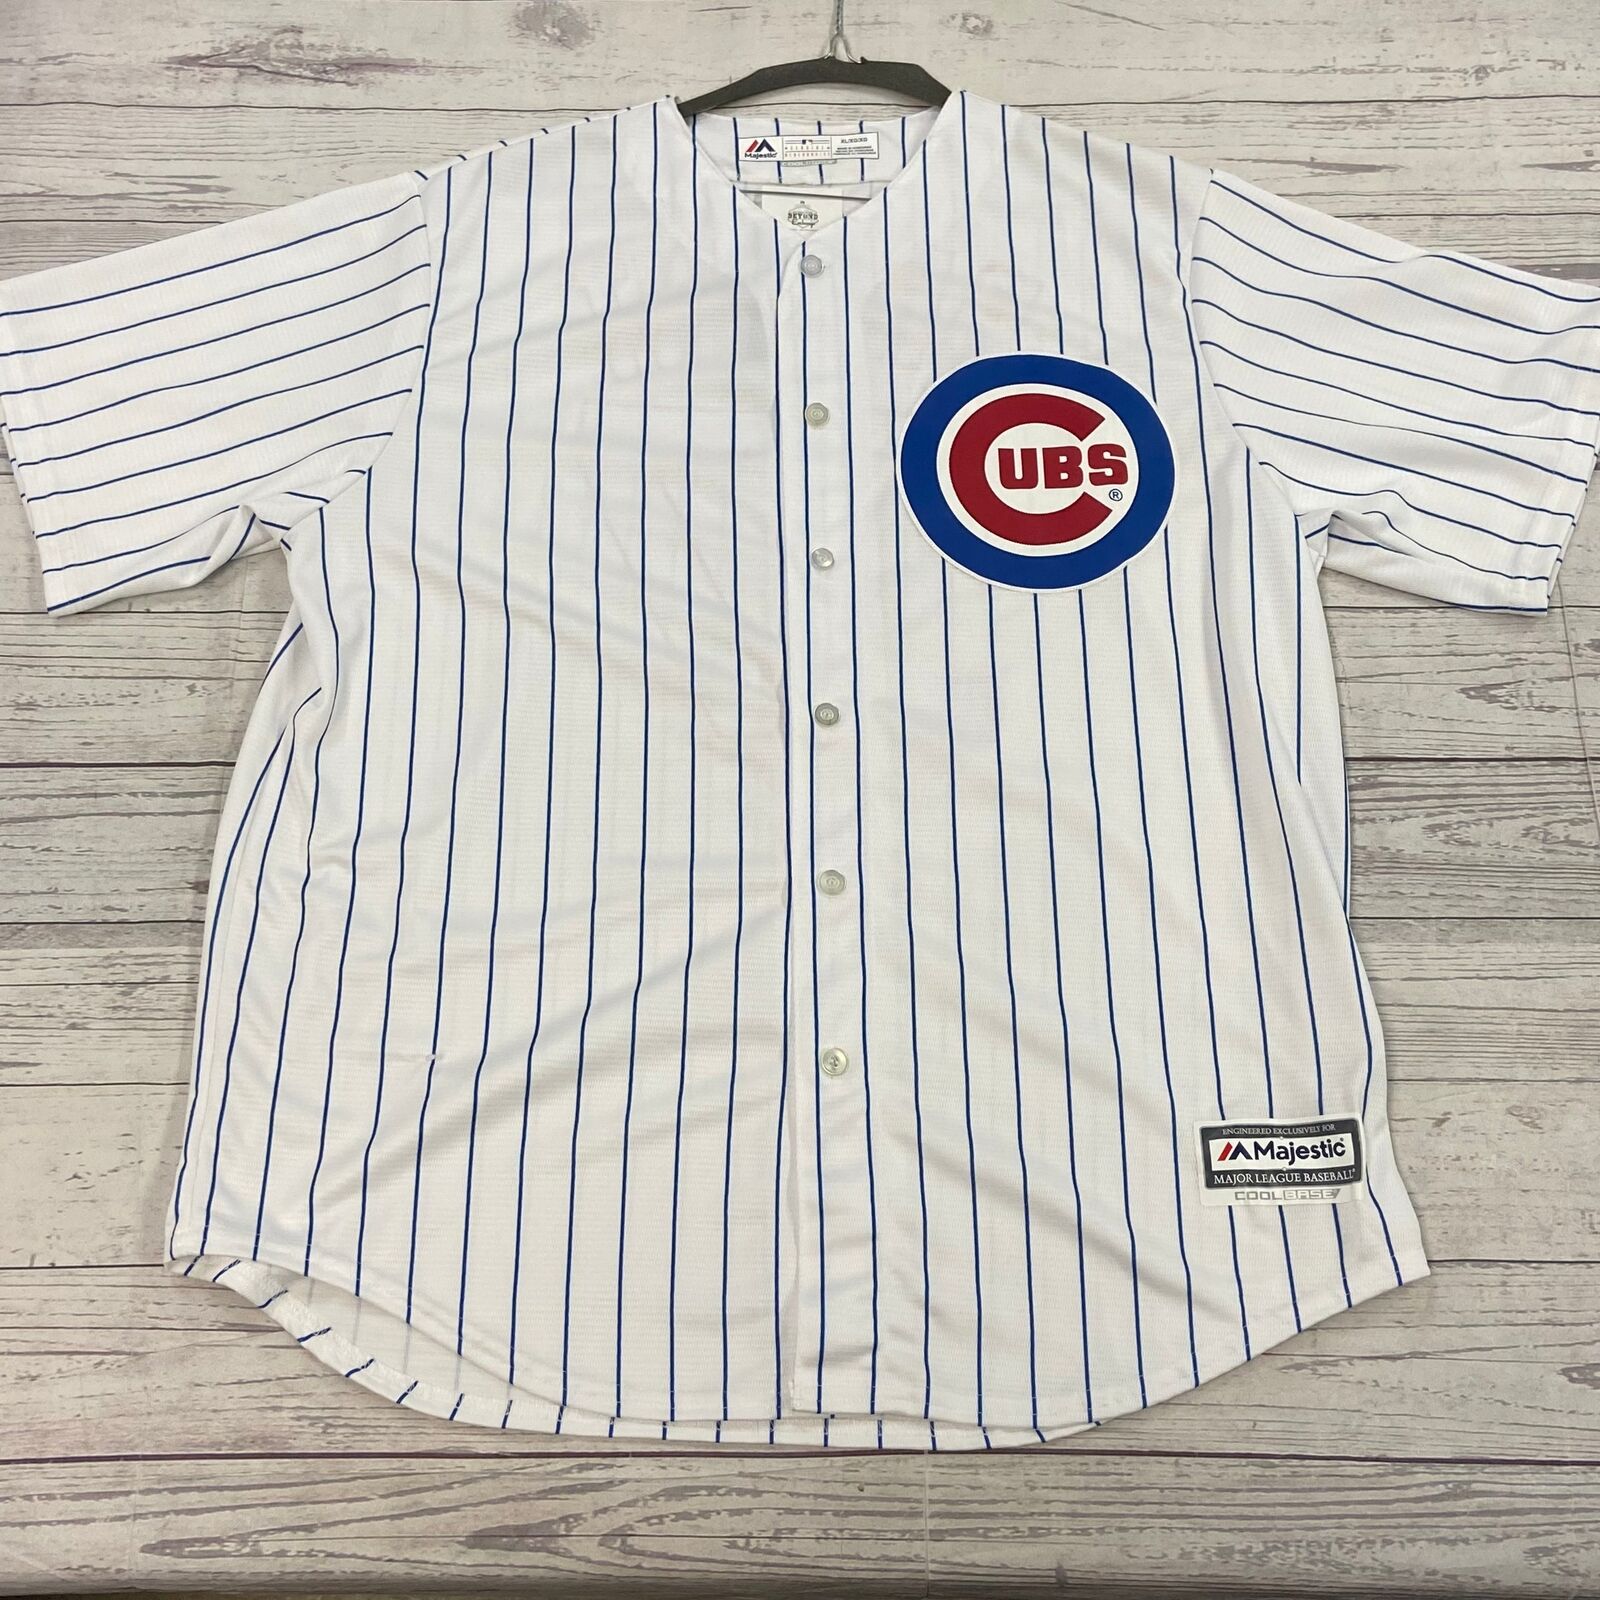 cubs jersey majestic